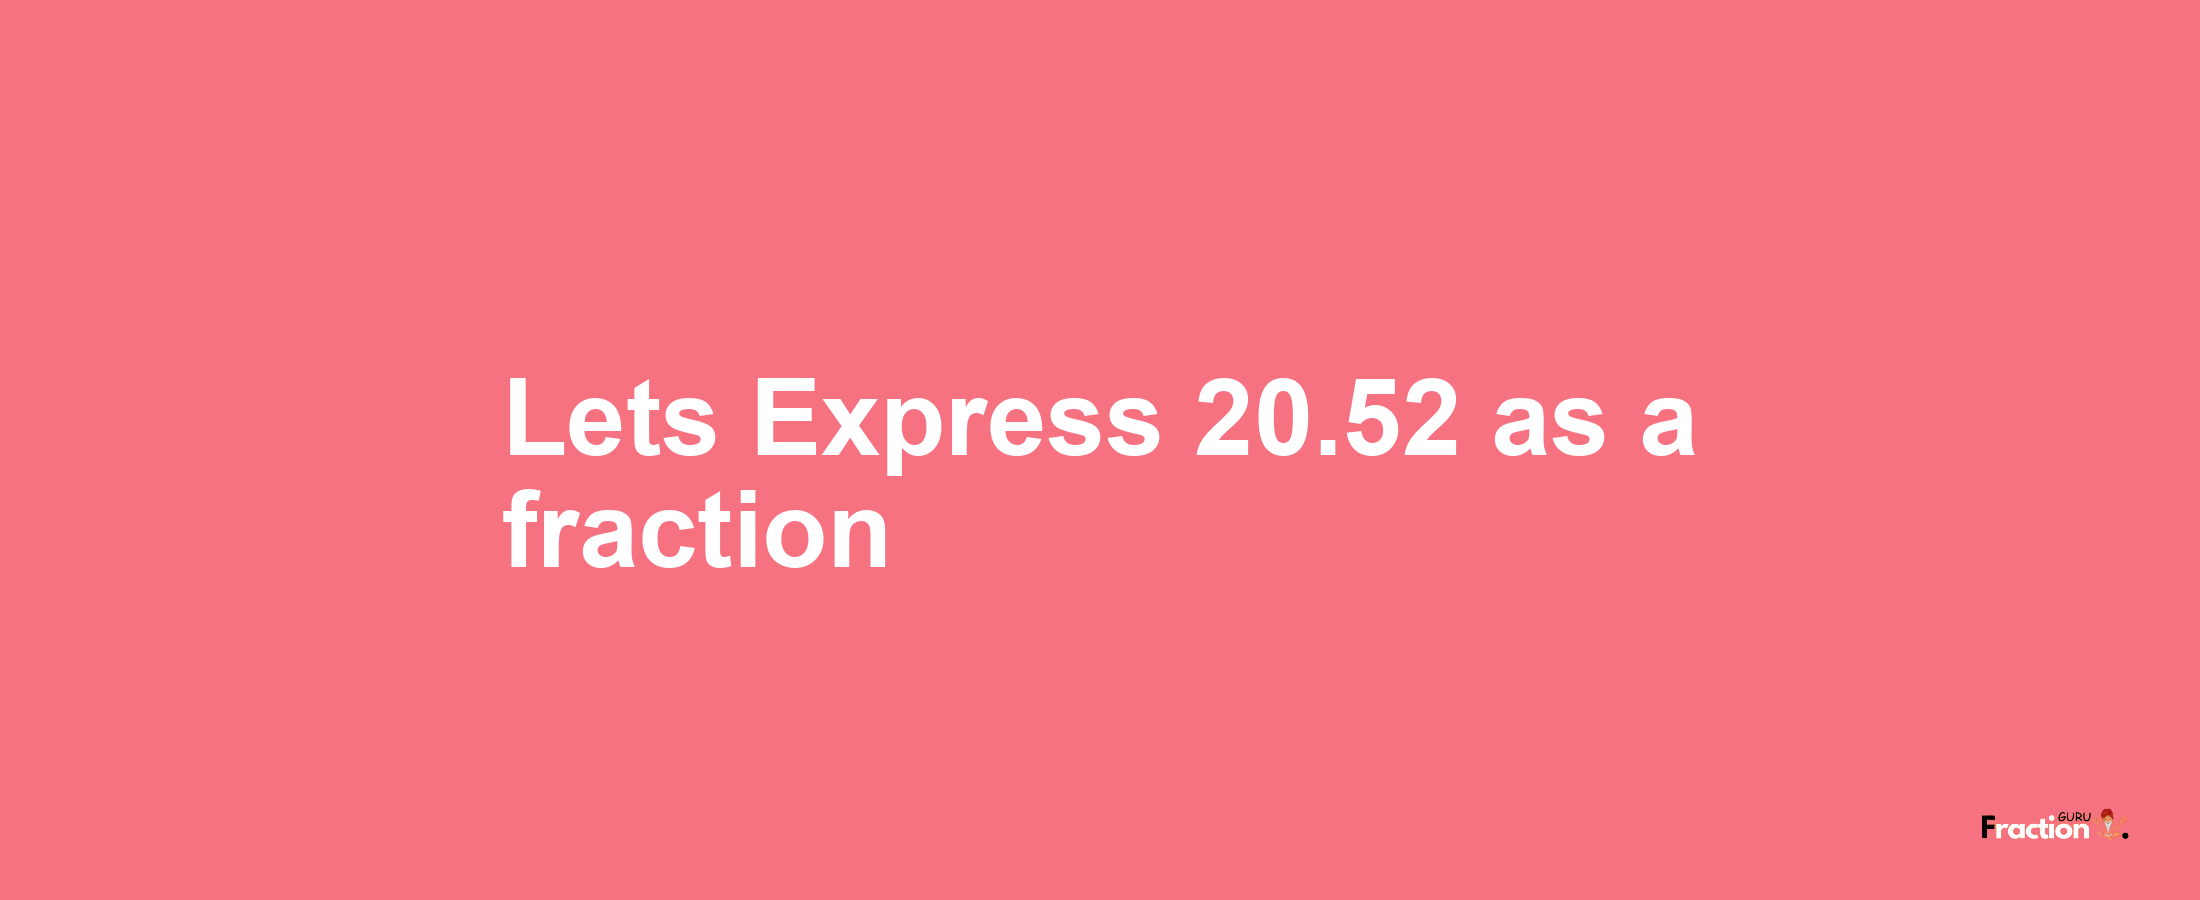 Lets Express 20.52 as afraction